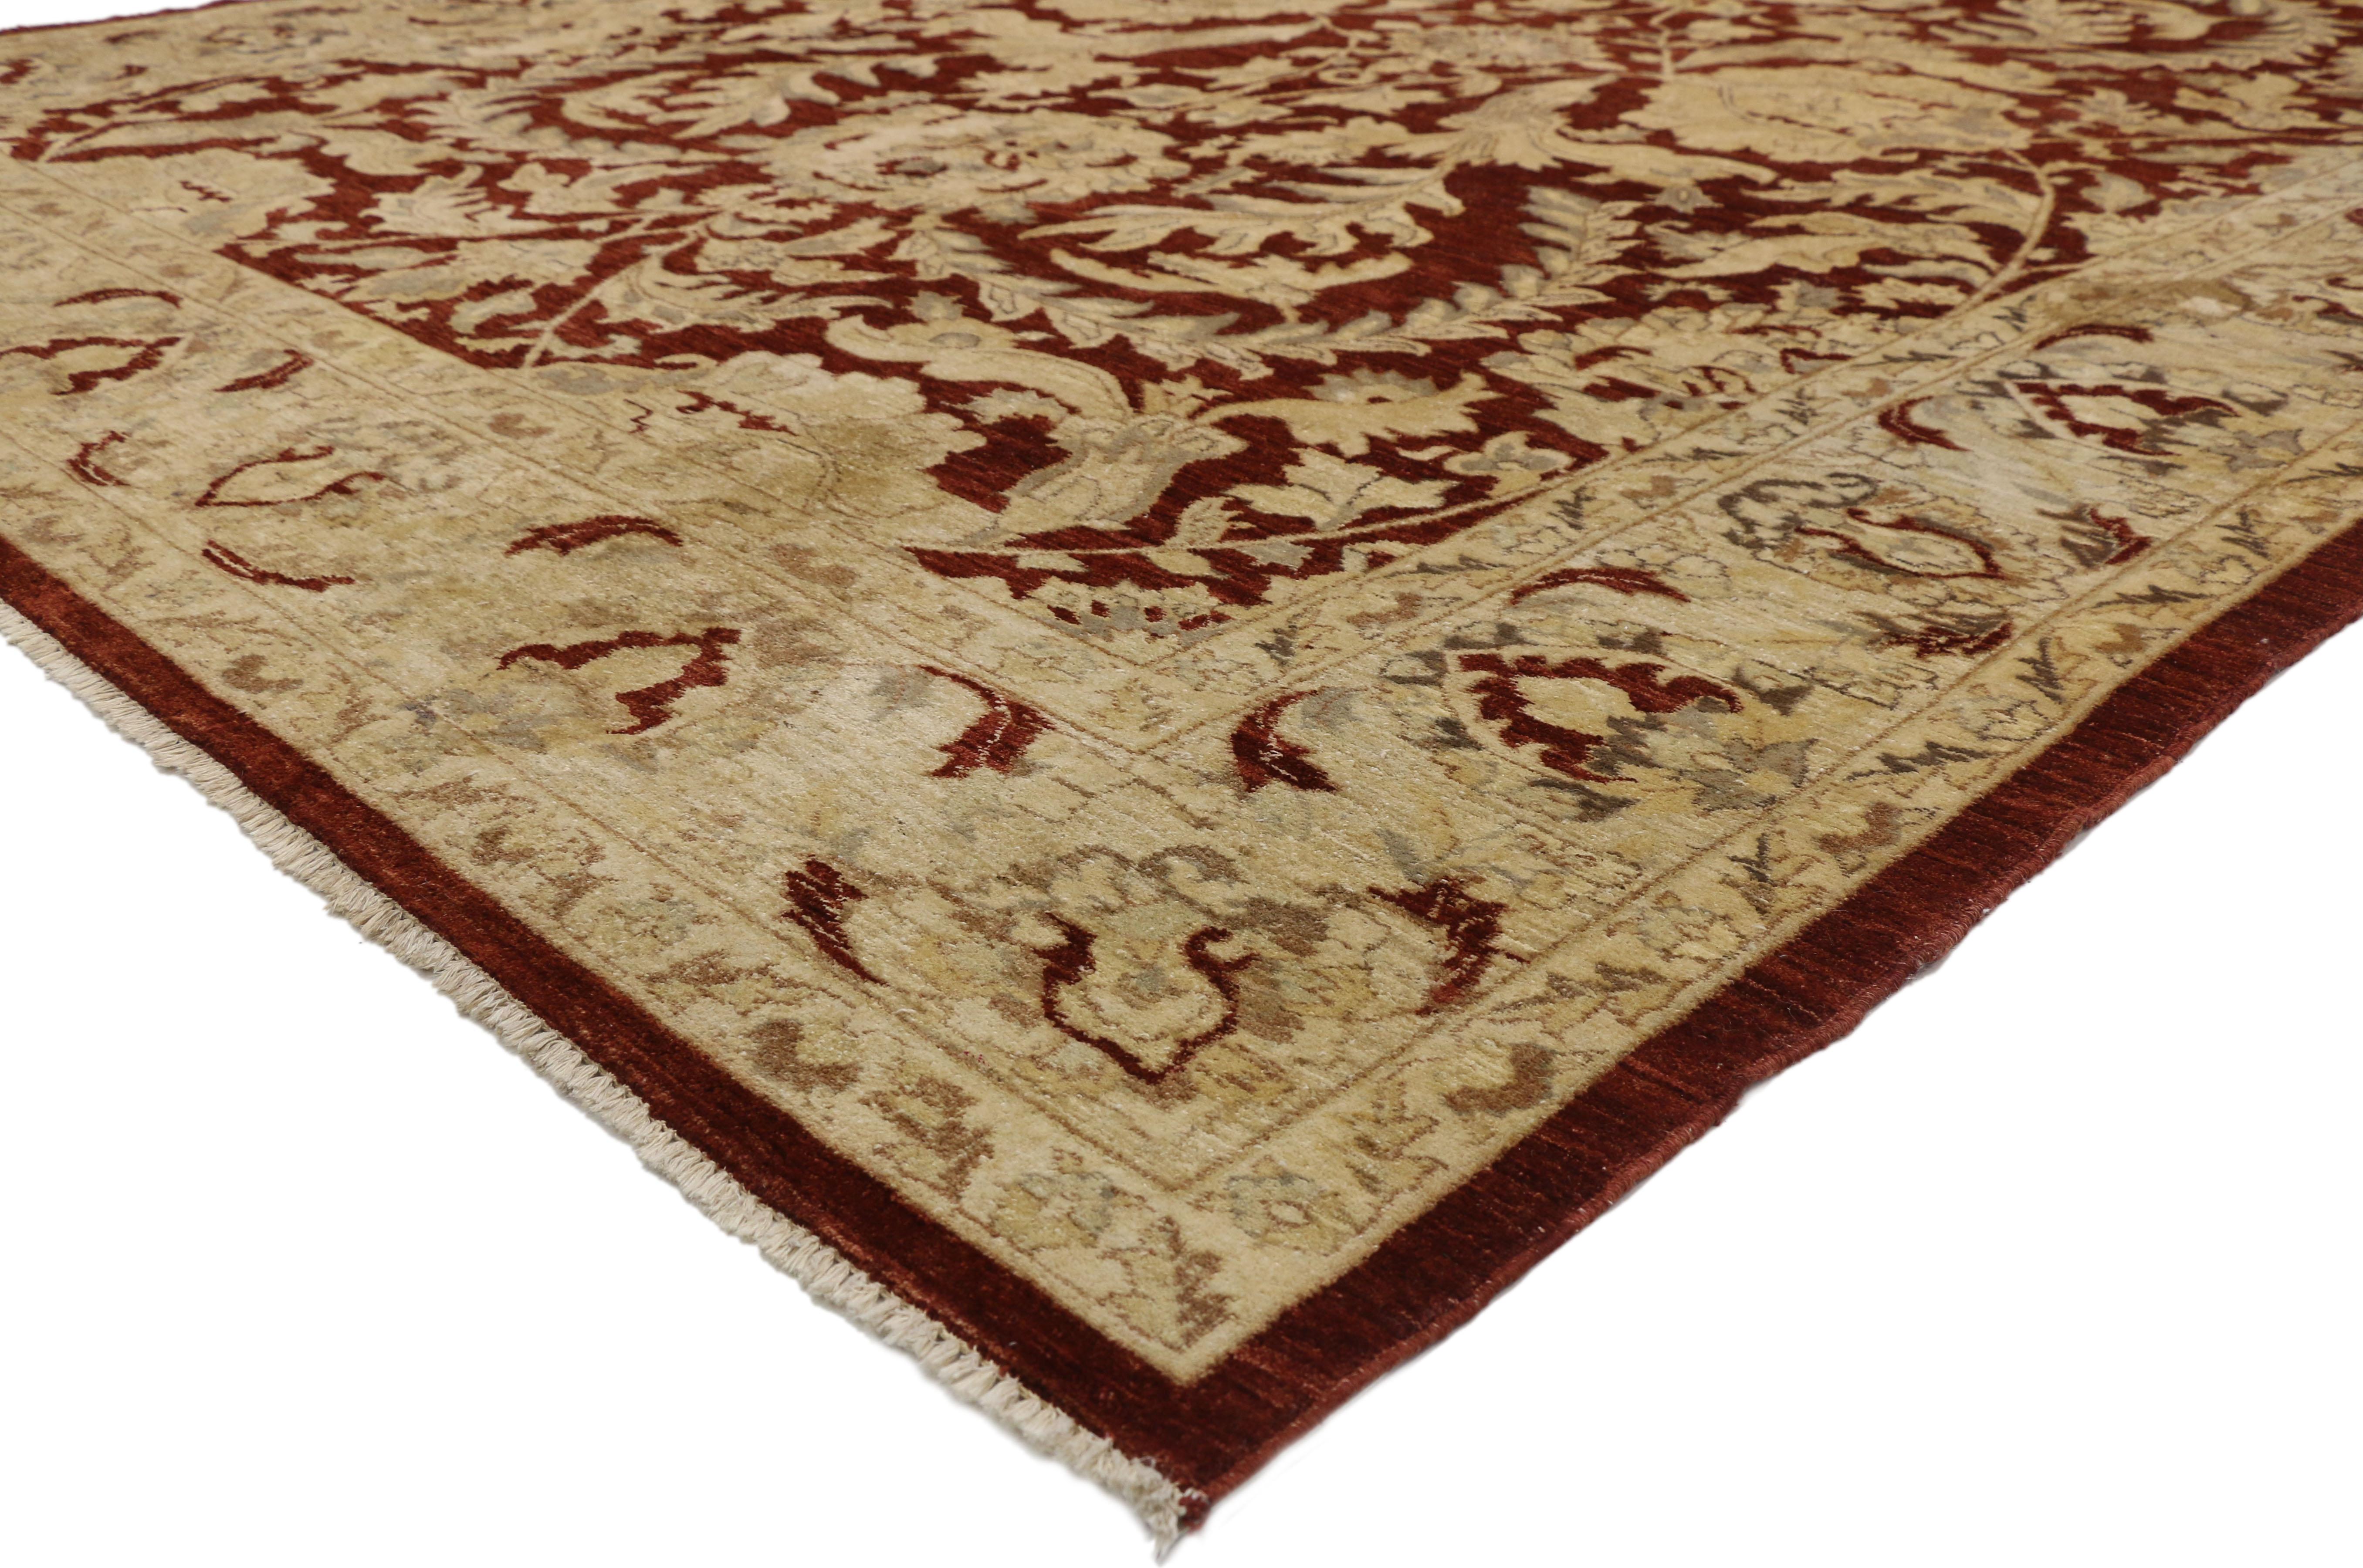 77315, antique Traditional Indian Area rug with Persian Design and Luxe Baroque style. This hand knotted wool antique traditional Indian area rug with a Classic Persian Design features an all-over Herati pattern of large-scale palmettes, curved